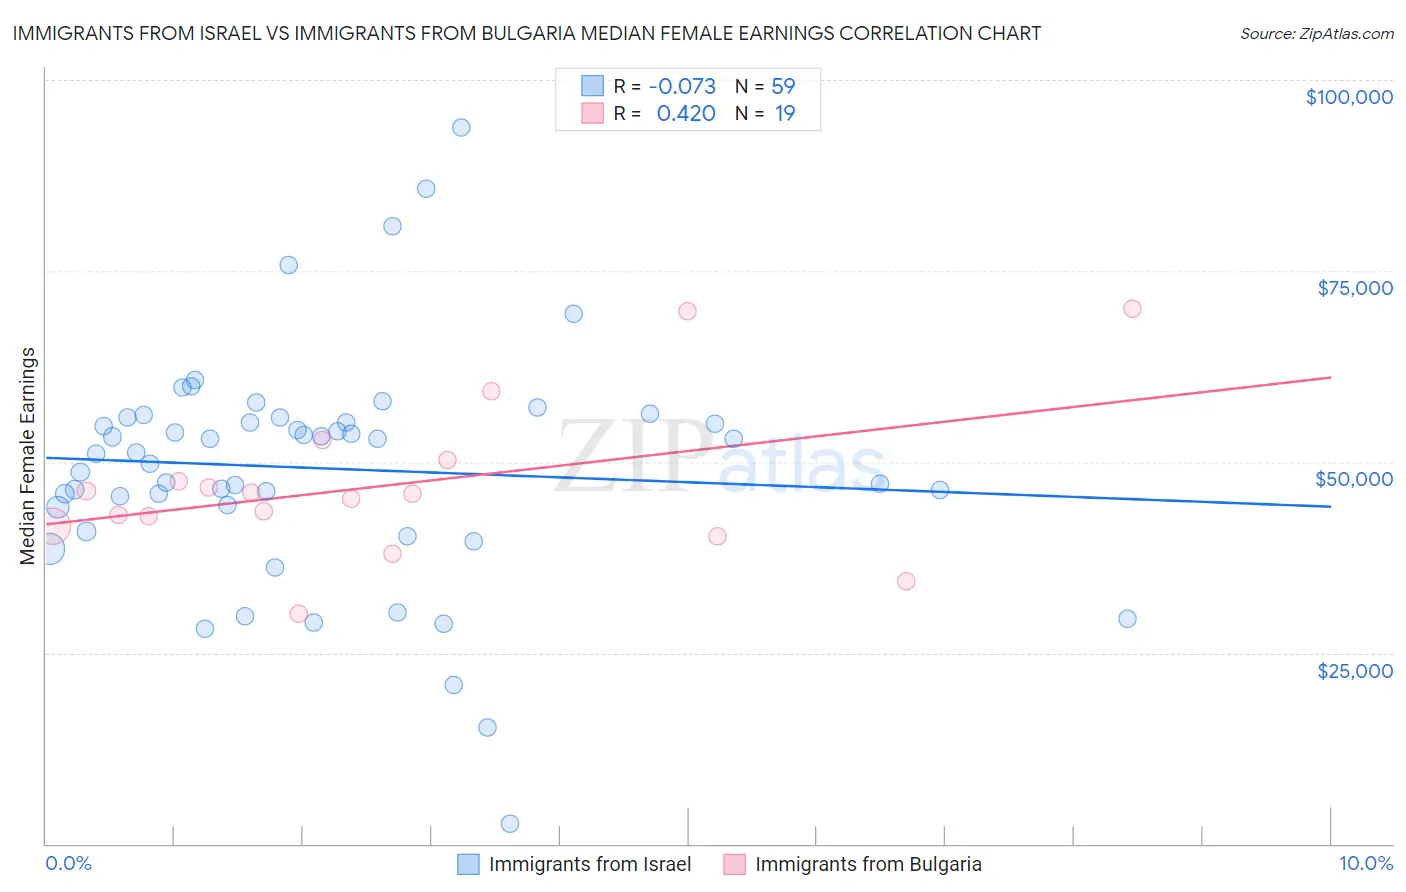 Immigrants from Israel vs Immigrants from Bulgaria Median Female Earnings